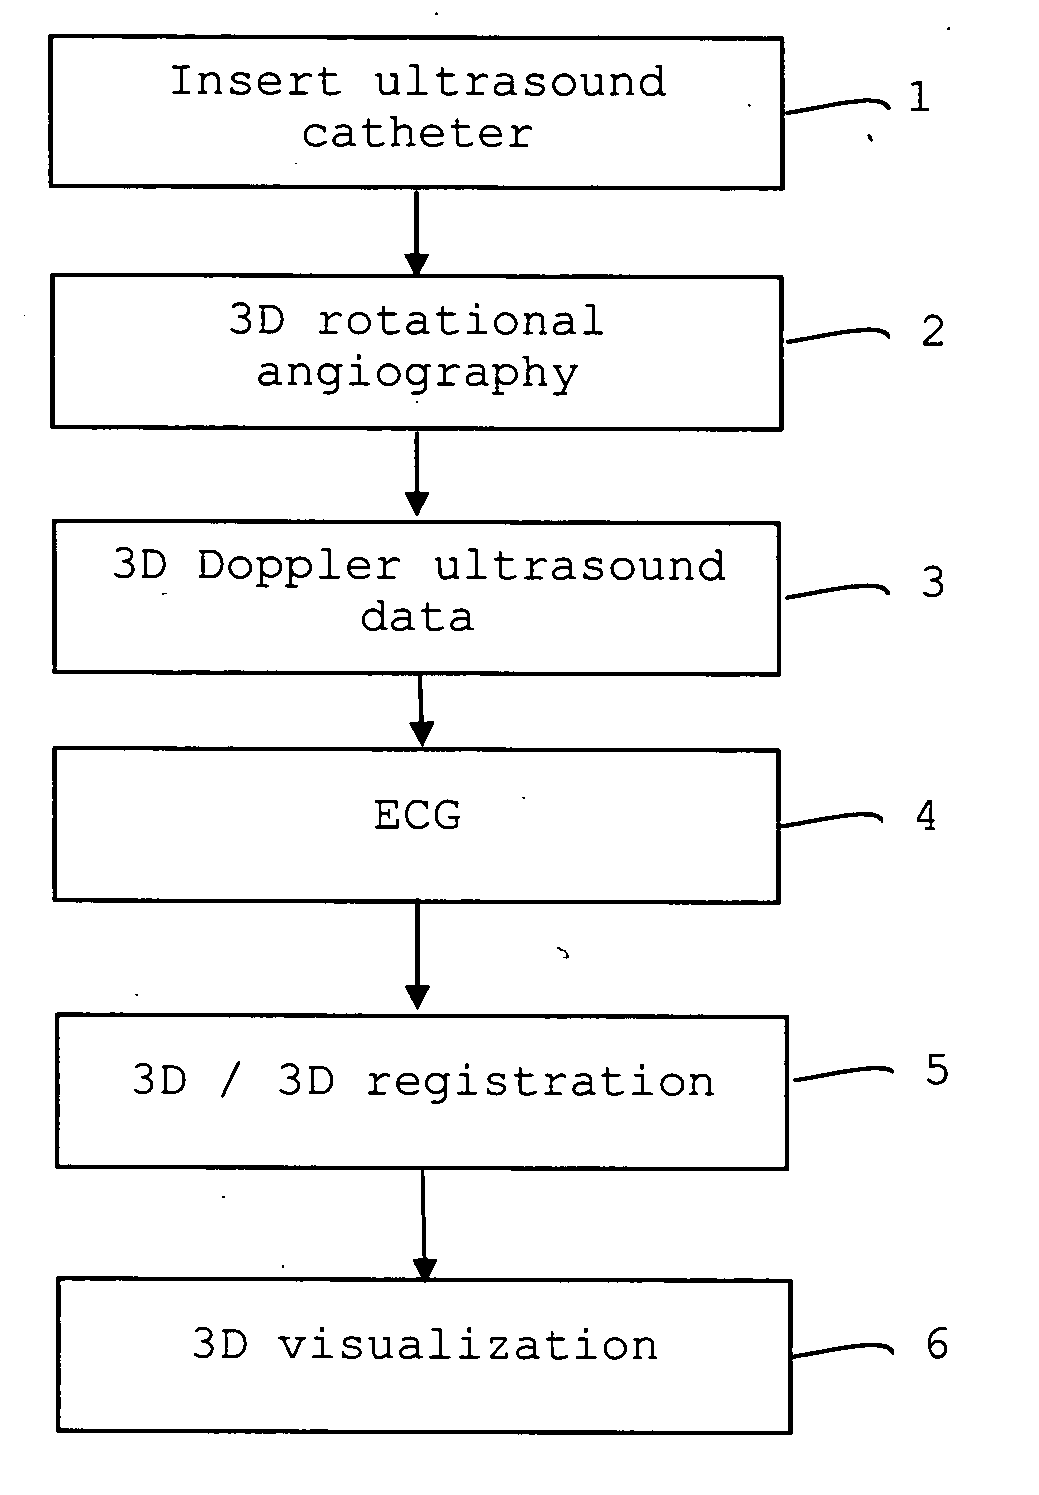 Method for generating and displaying examination images and associated ultrasound catheter